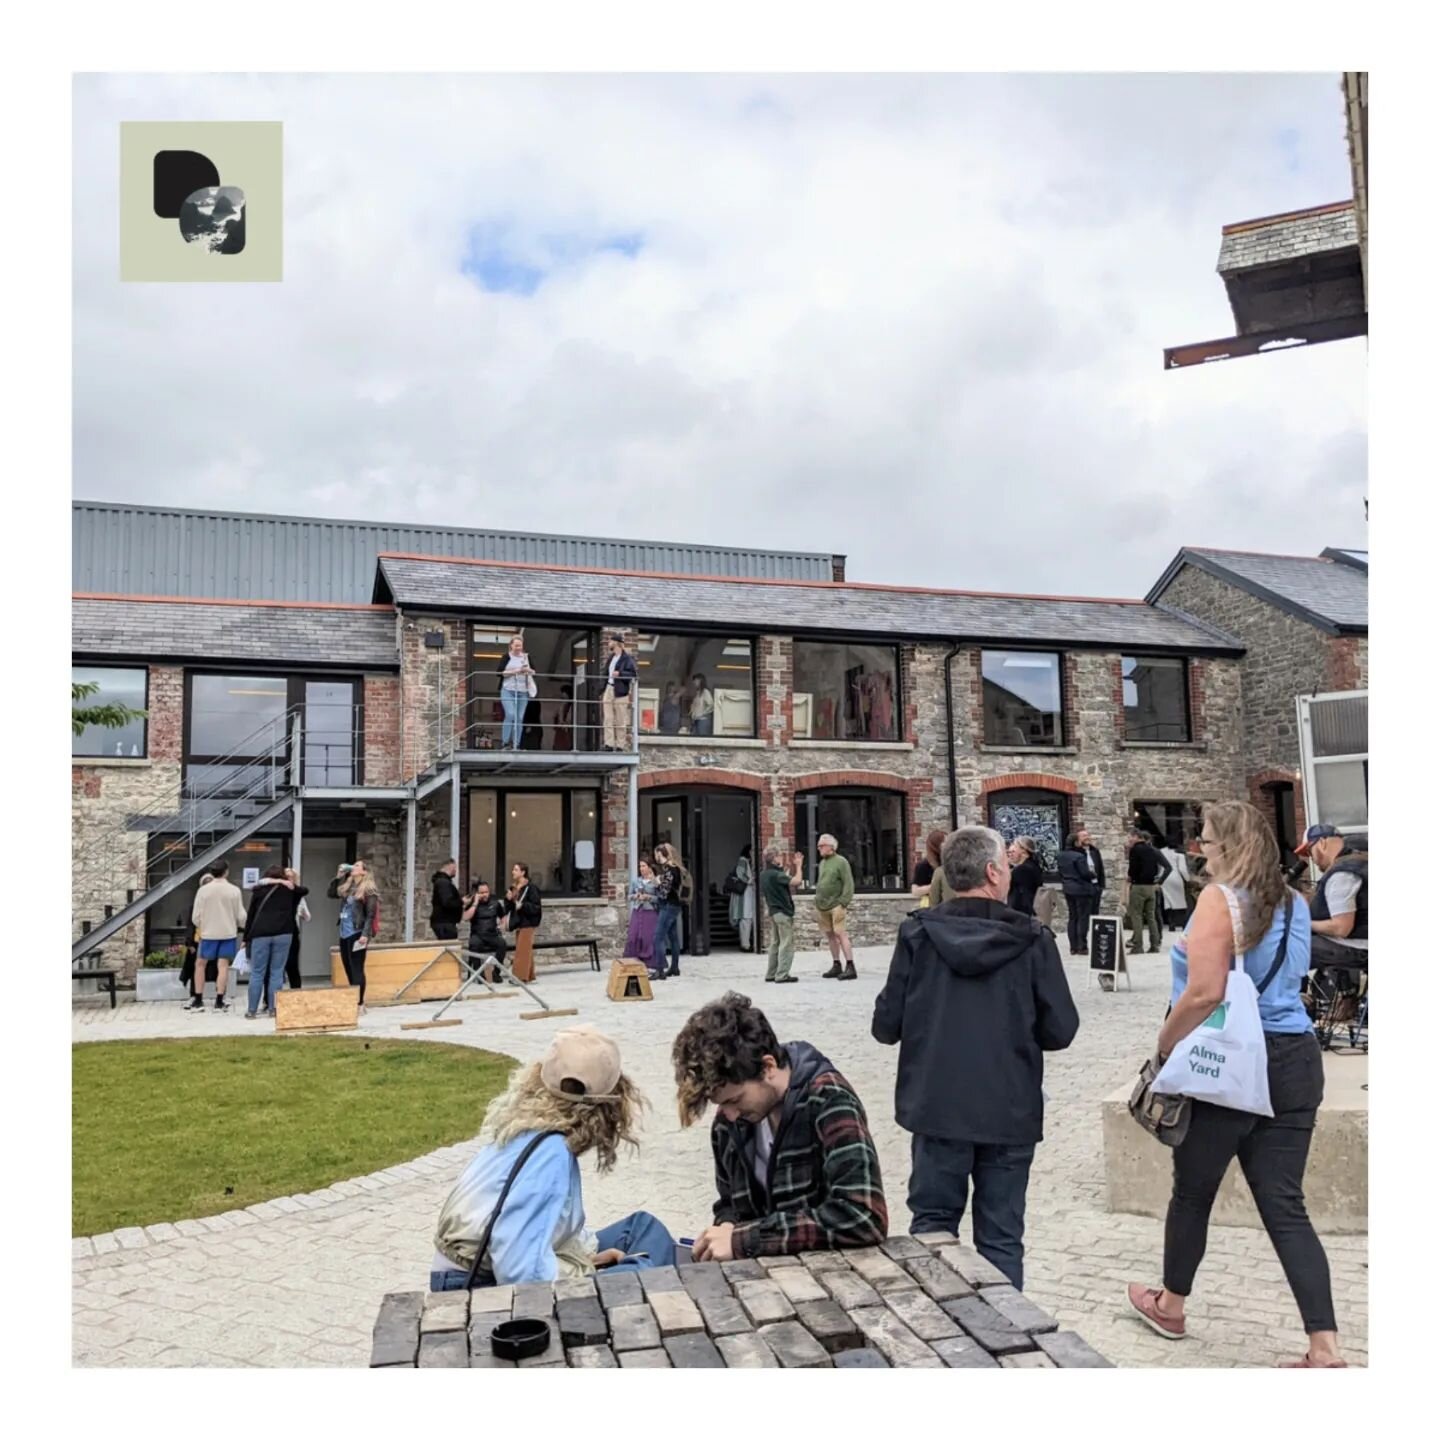 ⚪ALMA YARD⚪

Devon and Cornwall Planning Consultants were delighted to go along to @alma_yard 's Open Studios event last night. 

If you have been fortunate enough to see inside @alma_yard then you'll know just how special the space is and if you hav